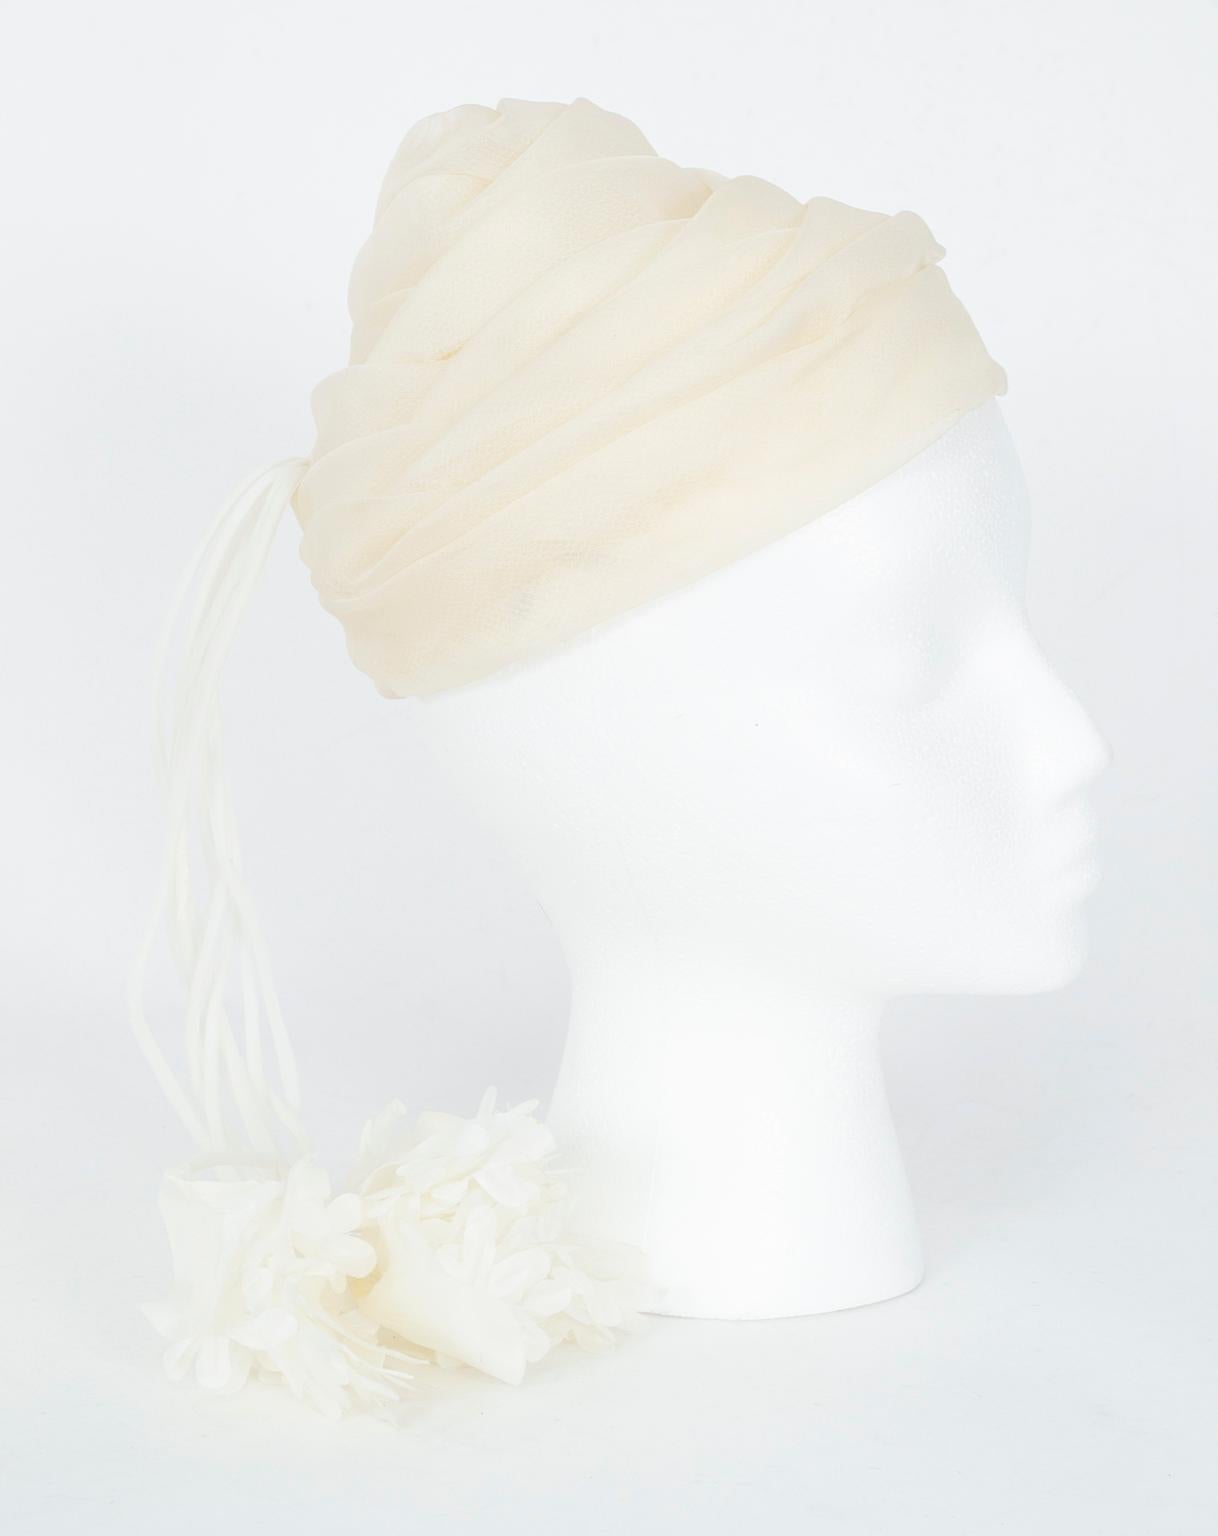 If a traditional wedding veil or cocktail hat is not your style, consider a floral calot: typically more couture in flavor, they remain ultra-feminine but leagues more stylish. Unlike most, however, this one combines high-style with handfuls of